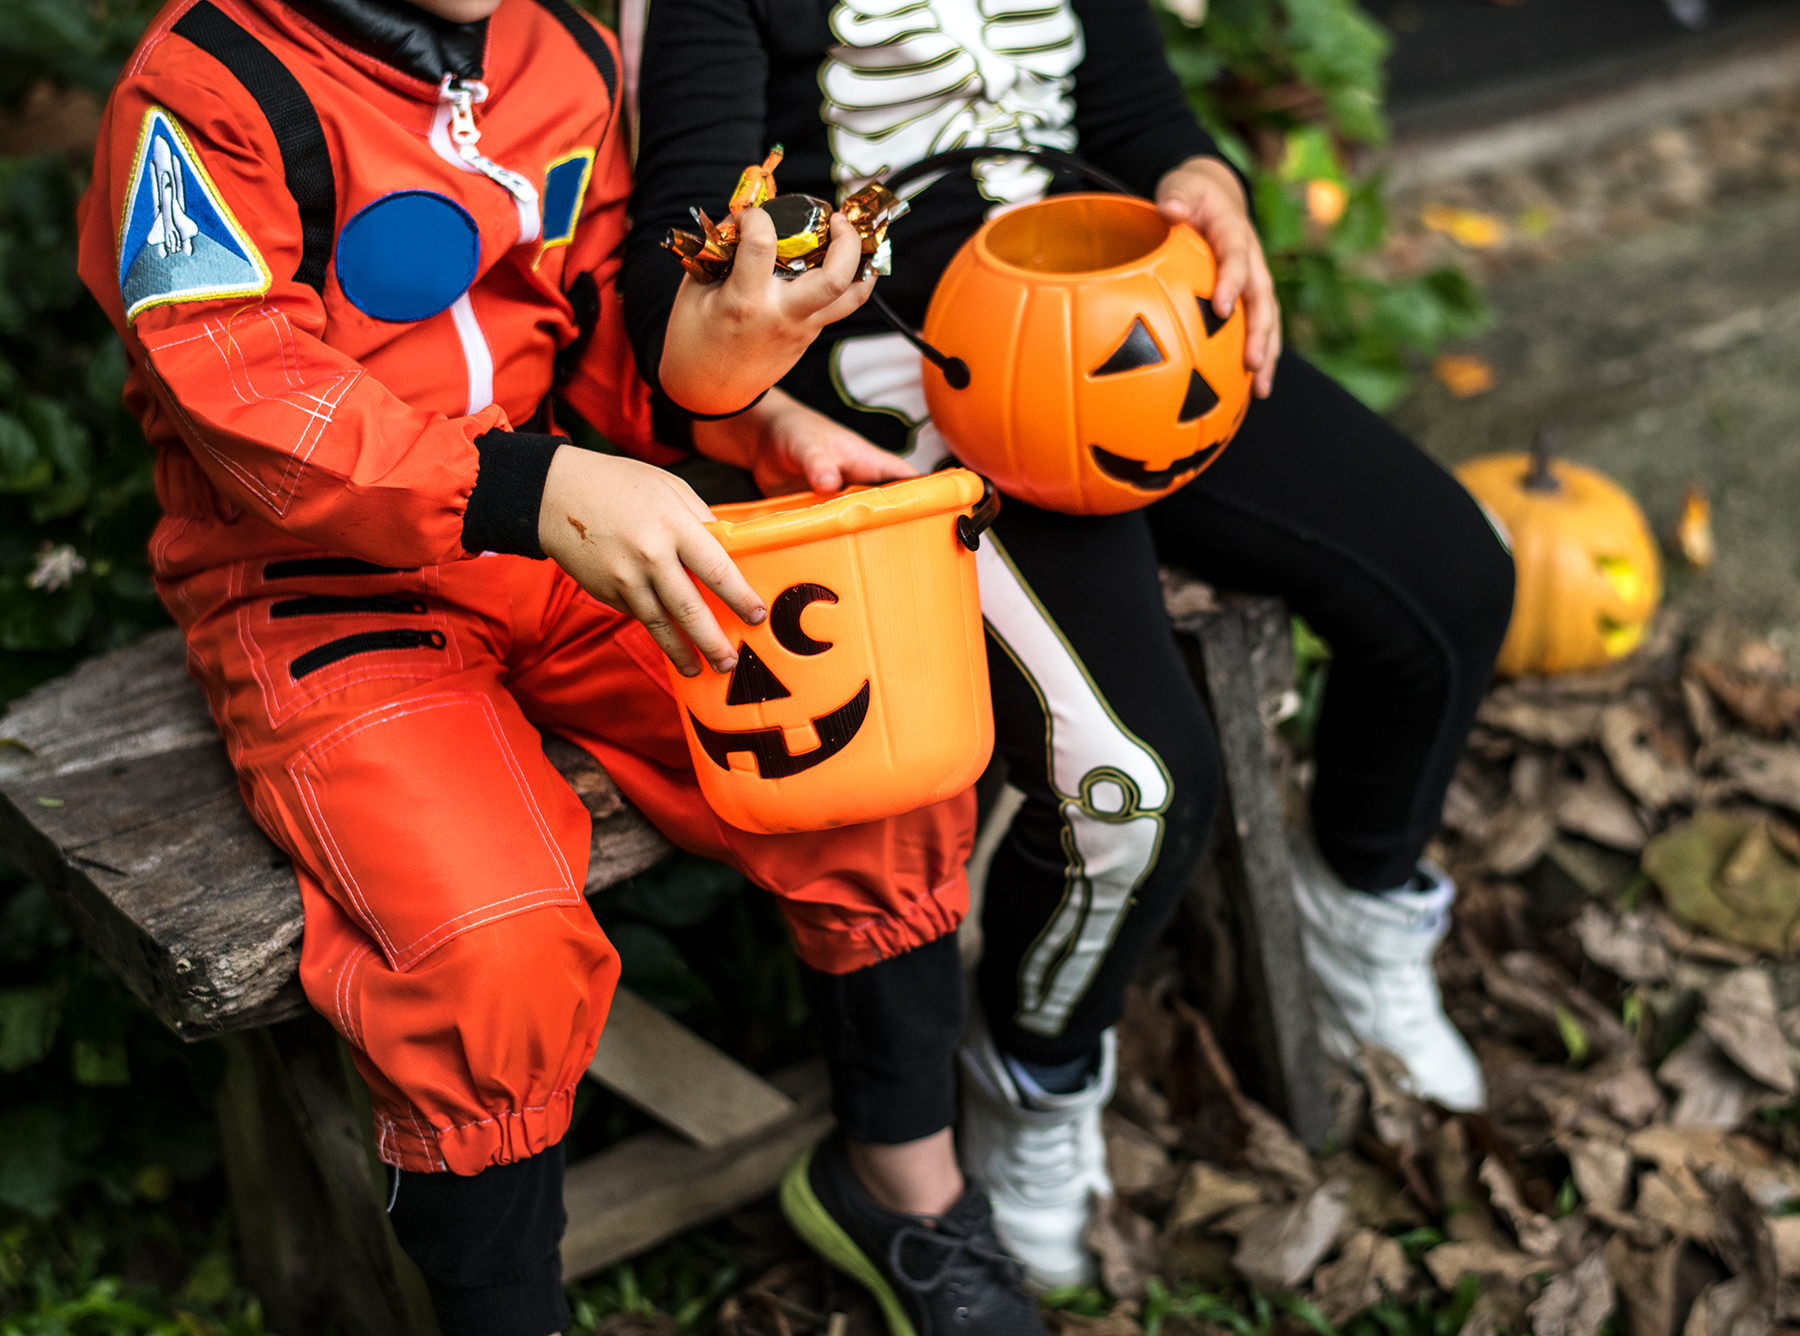 Trick-Or-Treat Safety To Teach Young Children